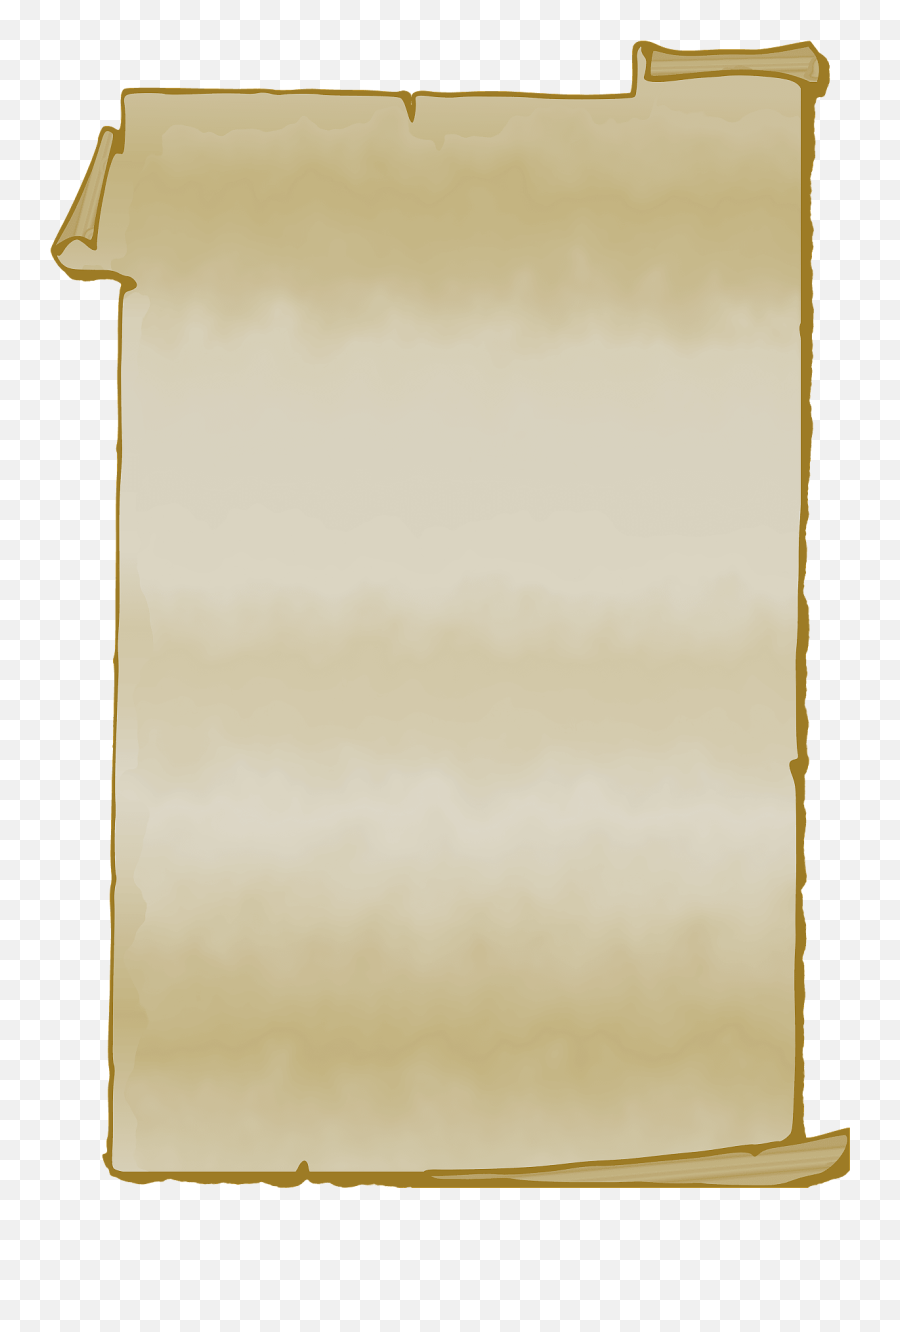 Parchment Scroll Clipart Free Download Transparent Png - Free Parchment Transparent Background Emoji,Scroll Clipart